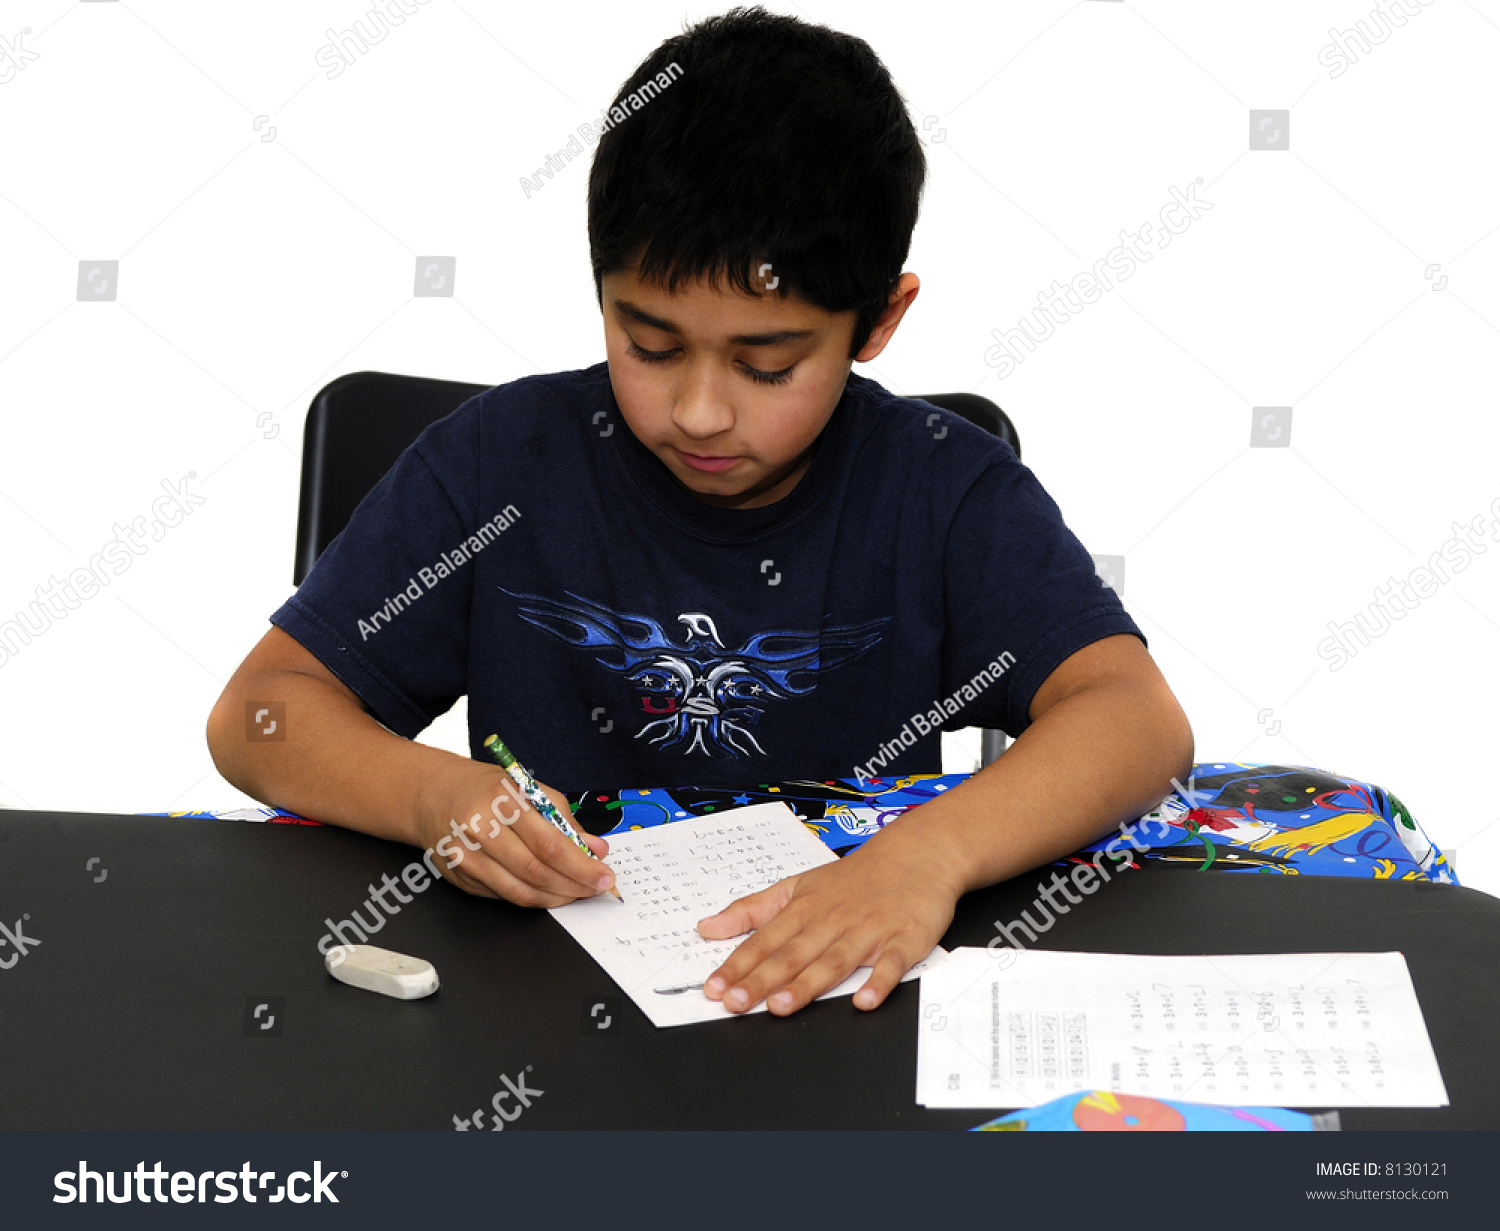 Essay when children are doing nothing they are doing mischief